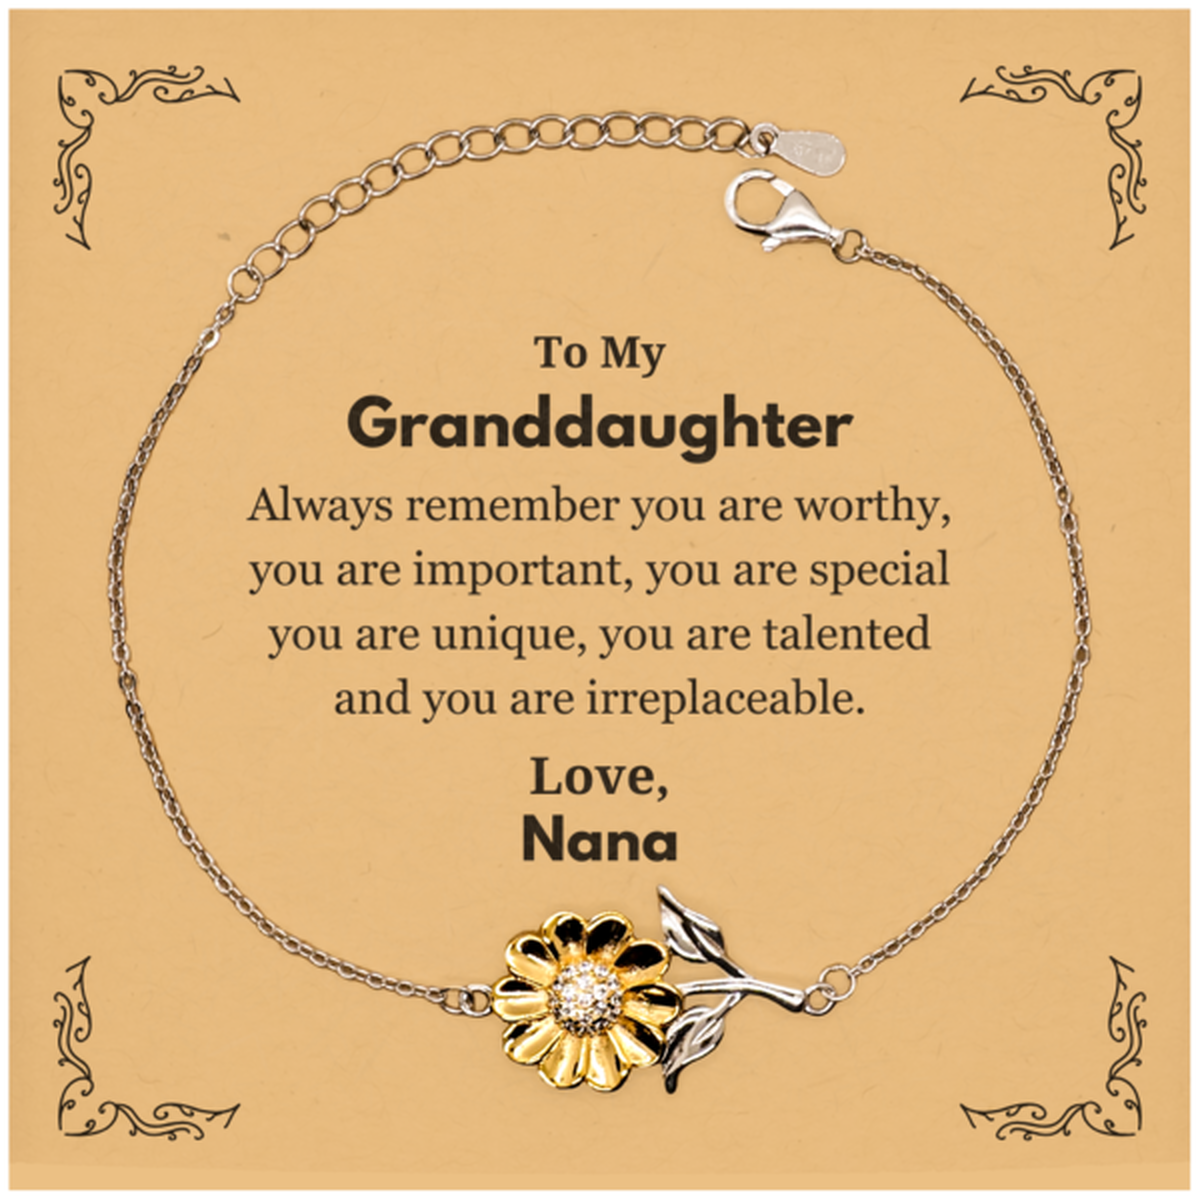 Granddaughter Birthday Gifts from Nana, Inspirational Sunflower Bracelet for Granddaughter Christmas Graduation Gifts for Granddaughter Always remember you are worthy, you are important. Love, Nana